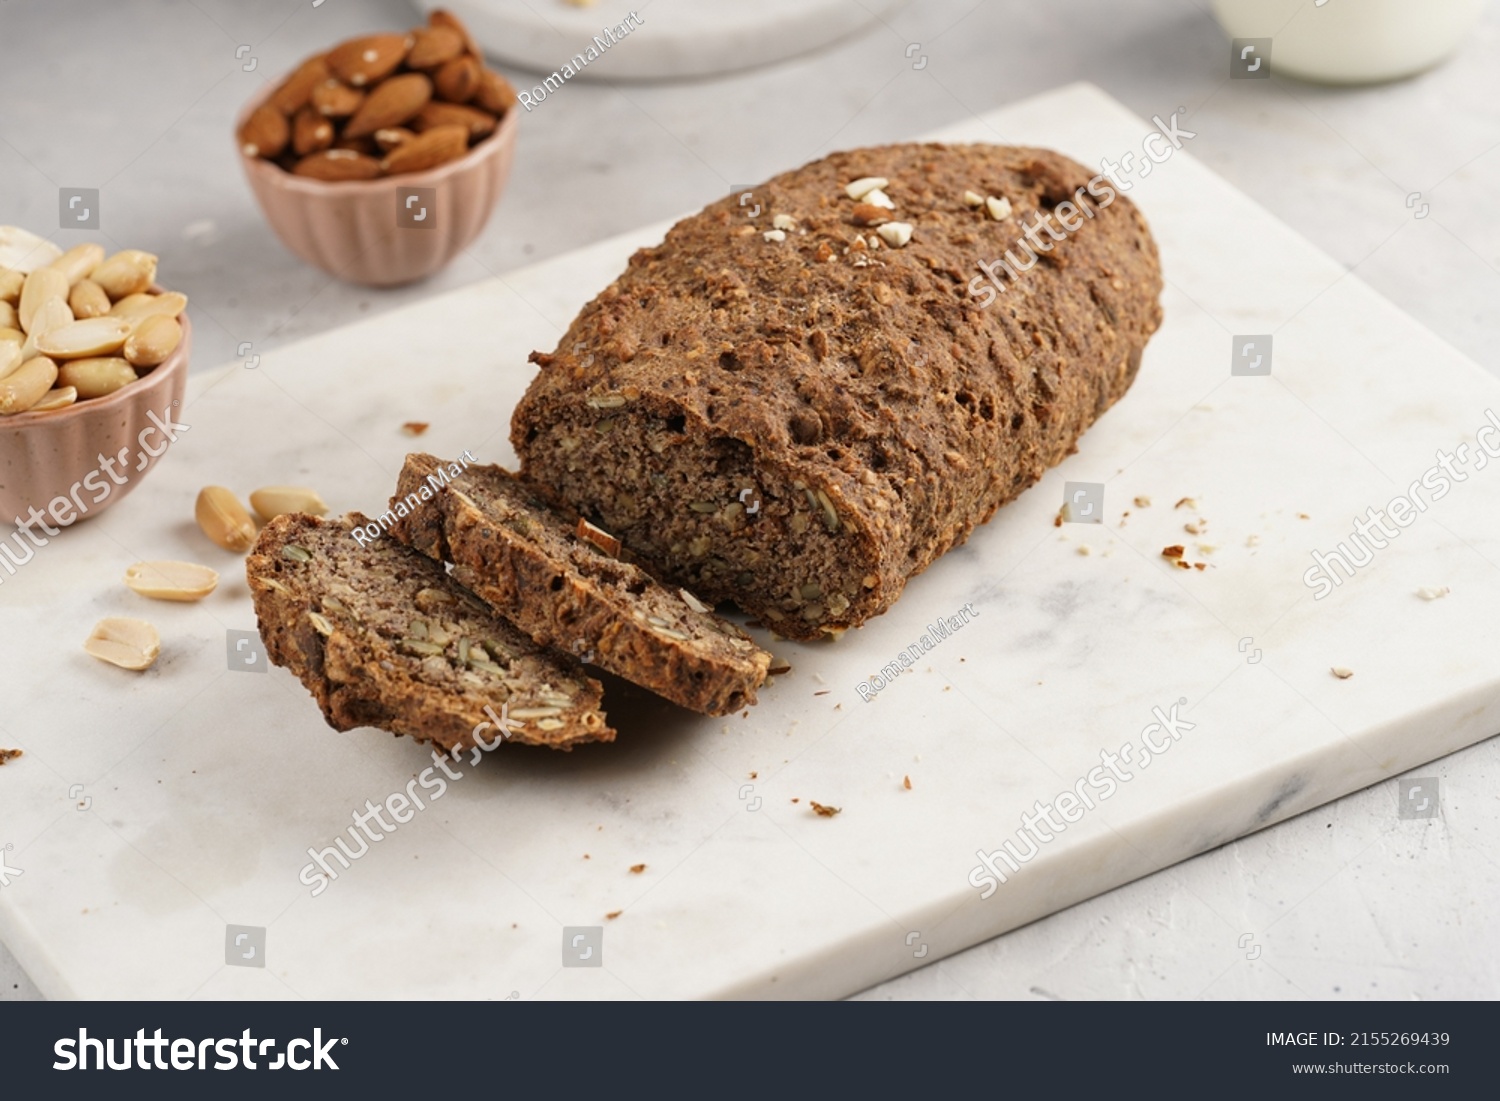 Homemade gluten-free and yeast-free buckwheat whole bread bread loaf with sunflower and pumkin seeds and nuts, cut in slices on white marble board #2155269439